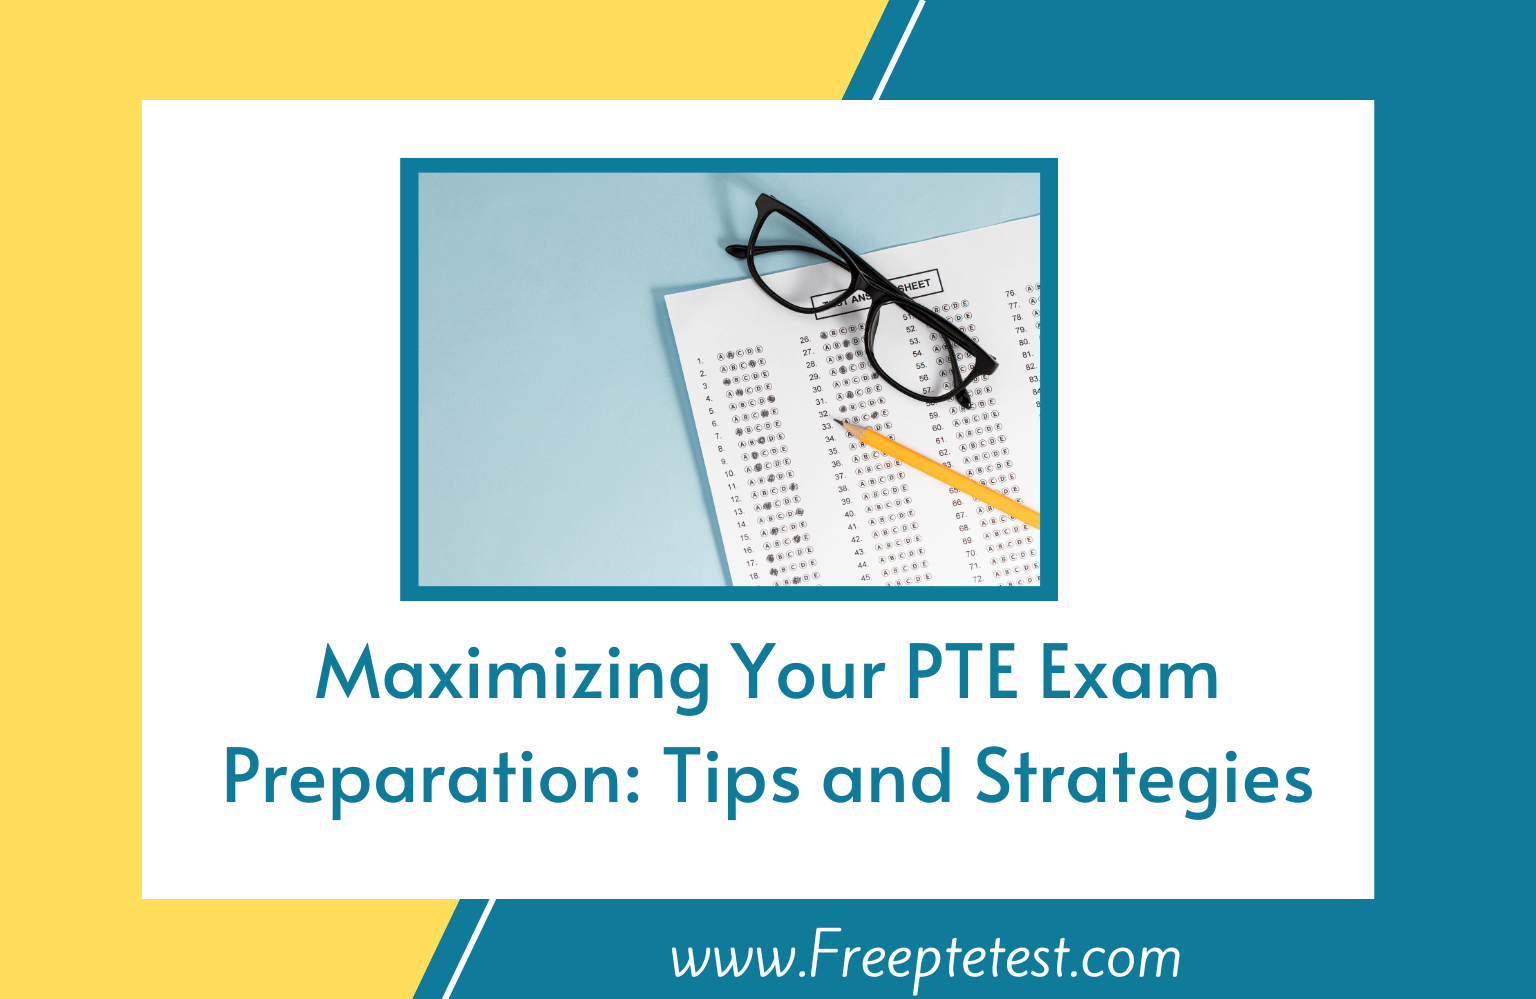 Maximizing Your PTE Exam Preparation: Tips and Strategies